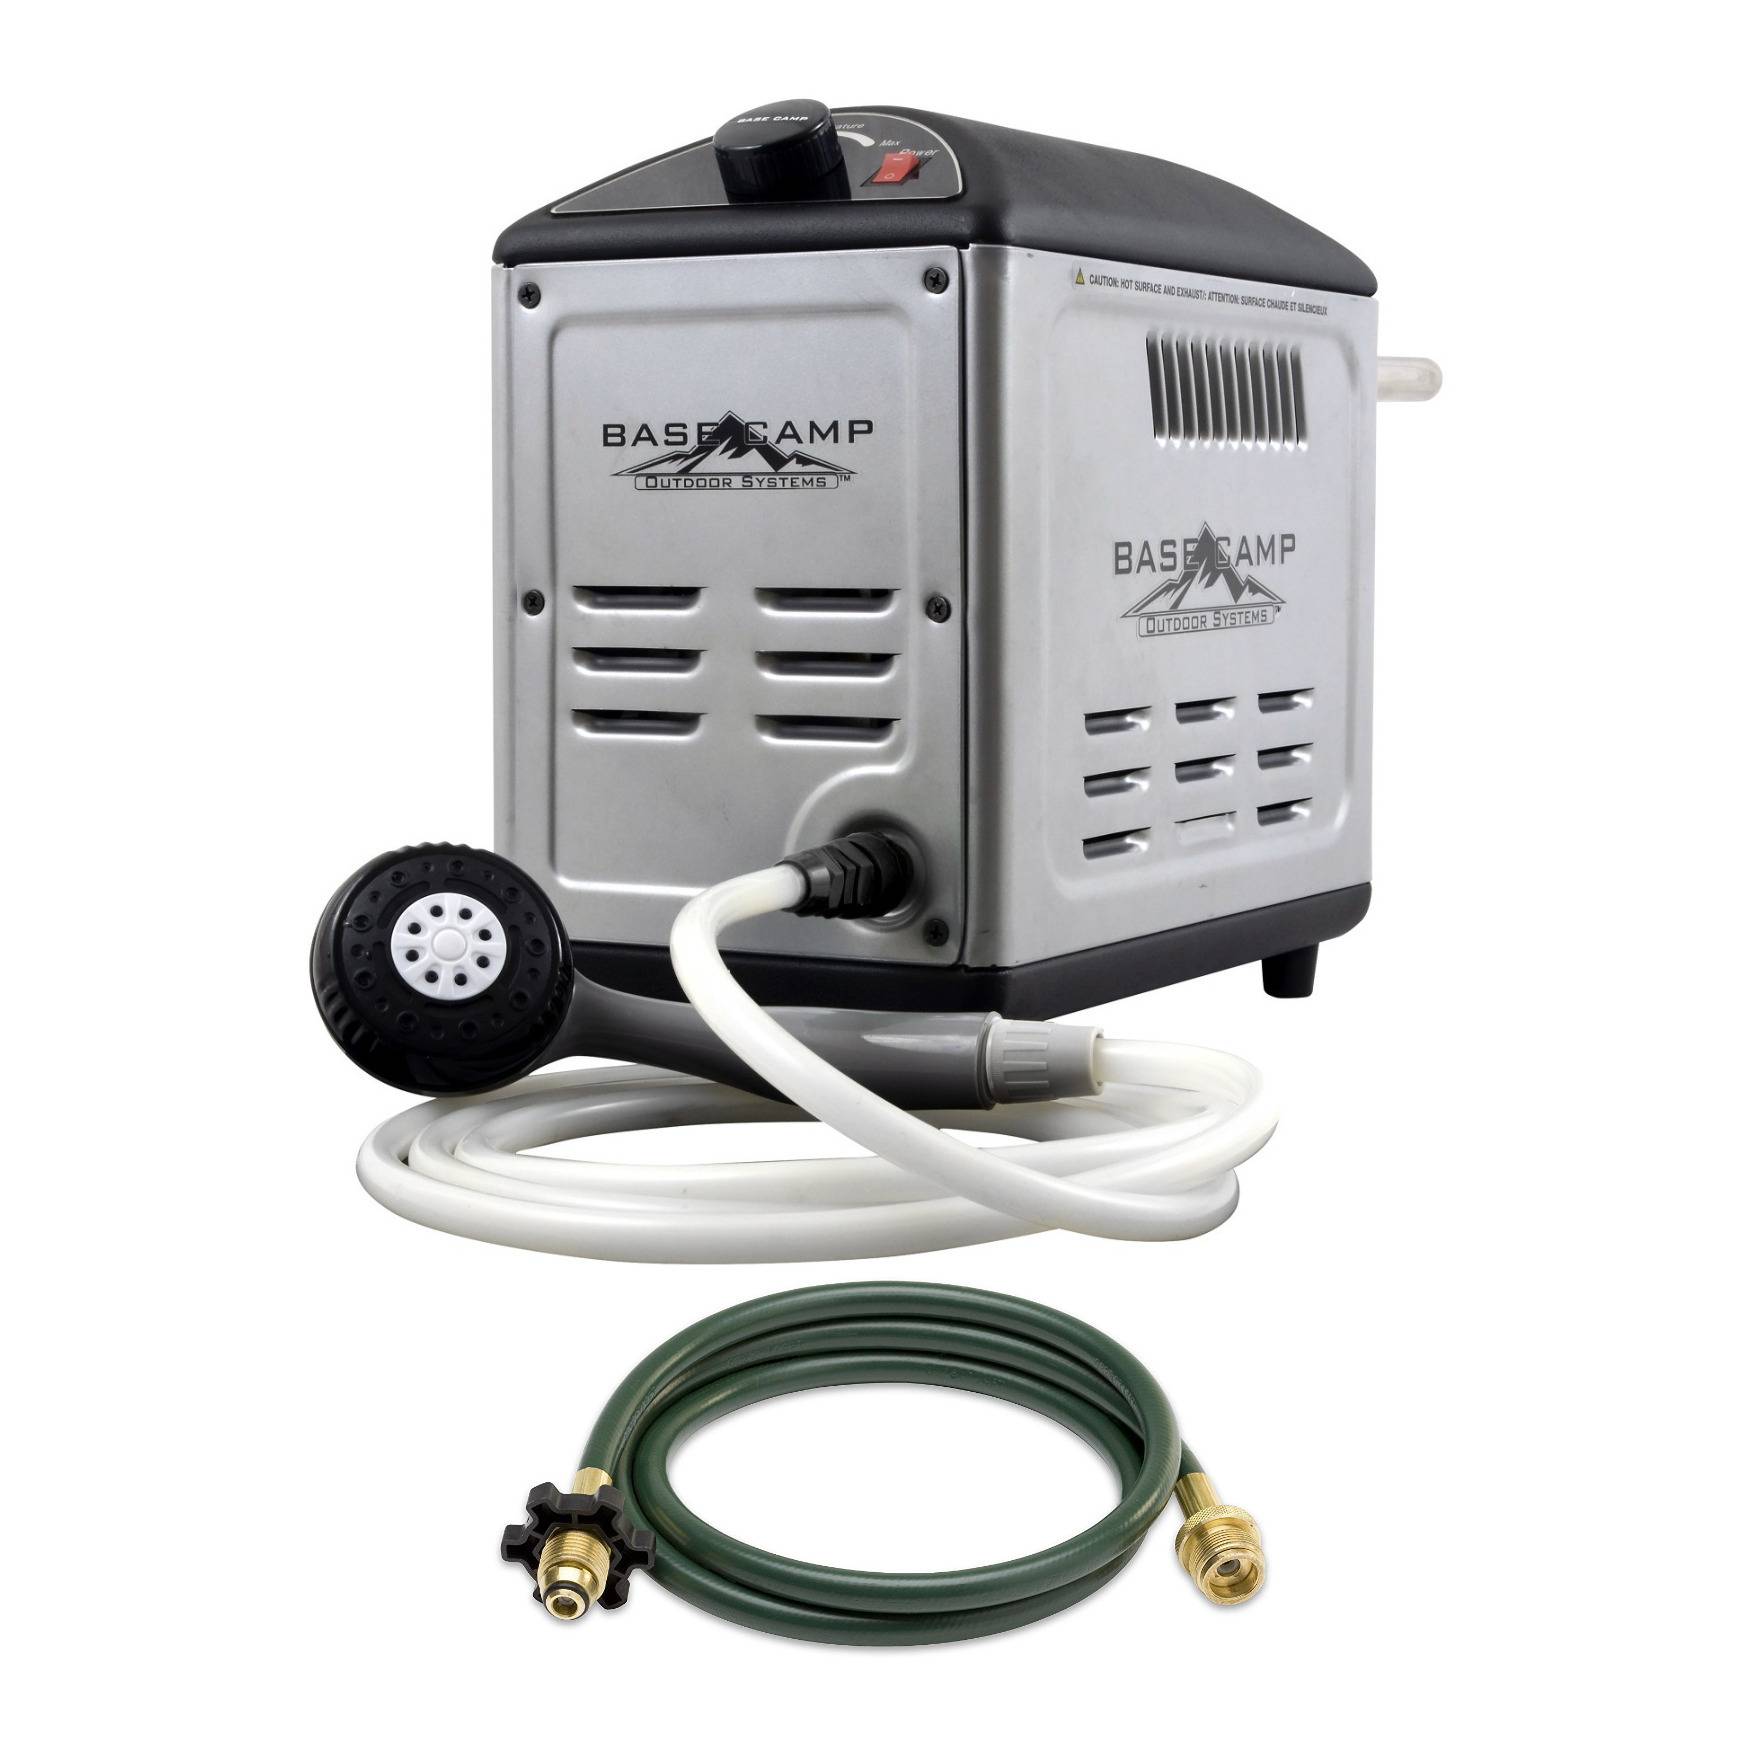 Mr. Heater BaseCamp BOSS-XB13 Battery Operated Shower System and Extra 10-Feet Hose